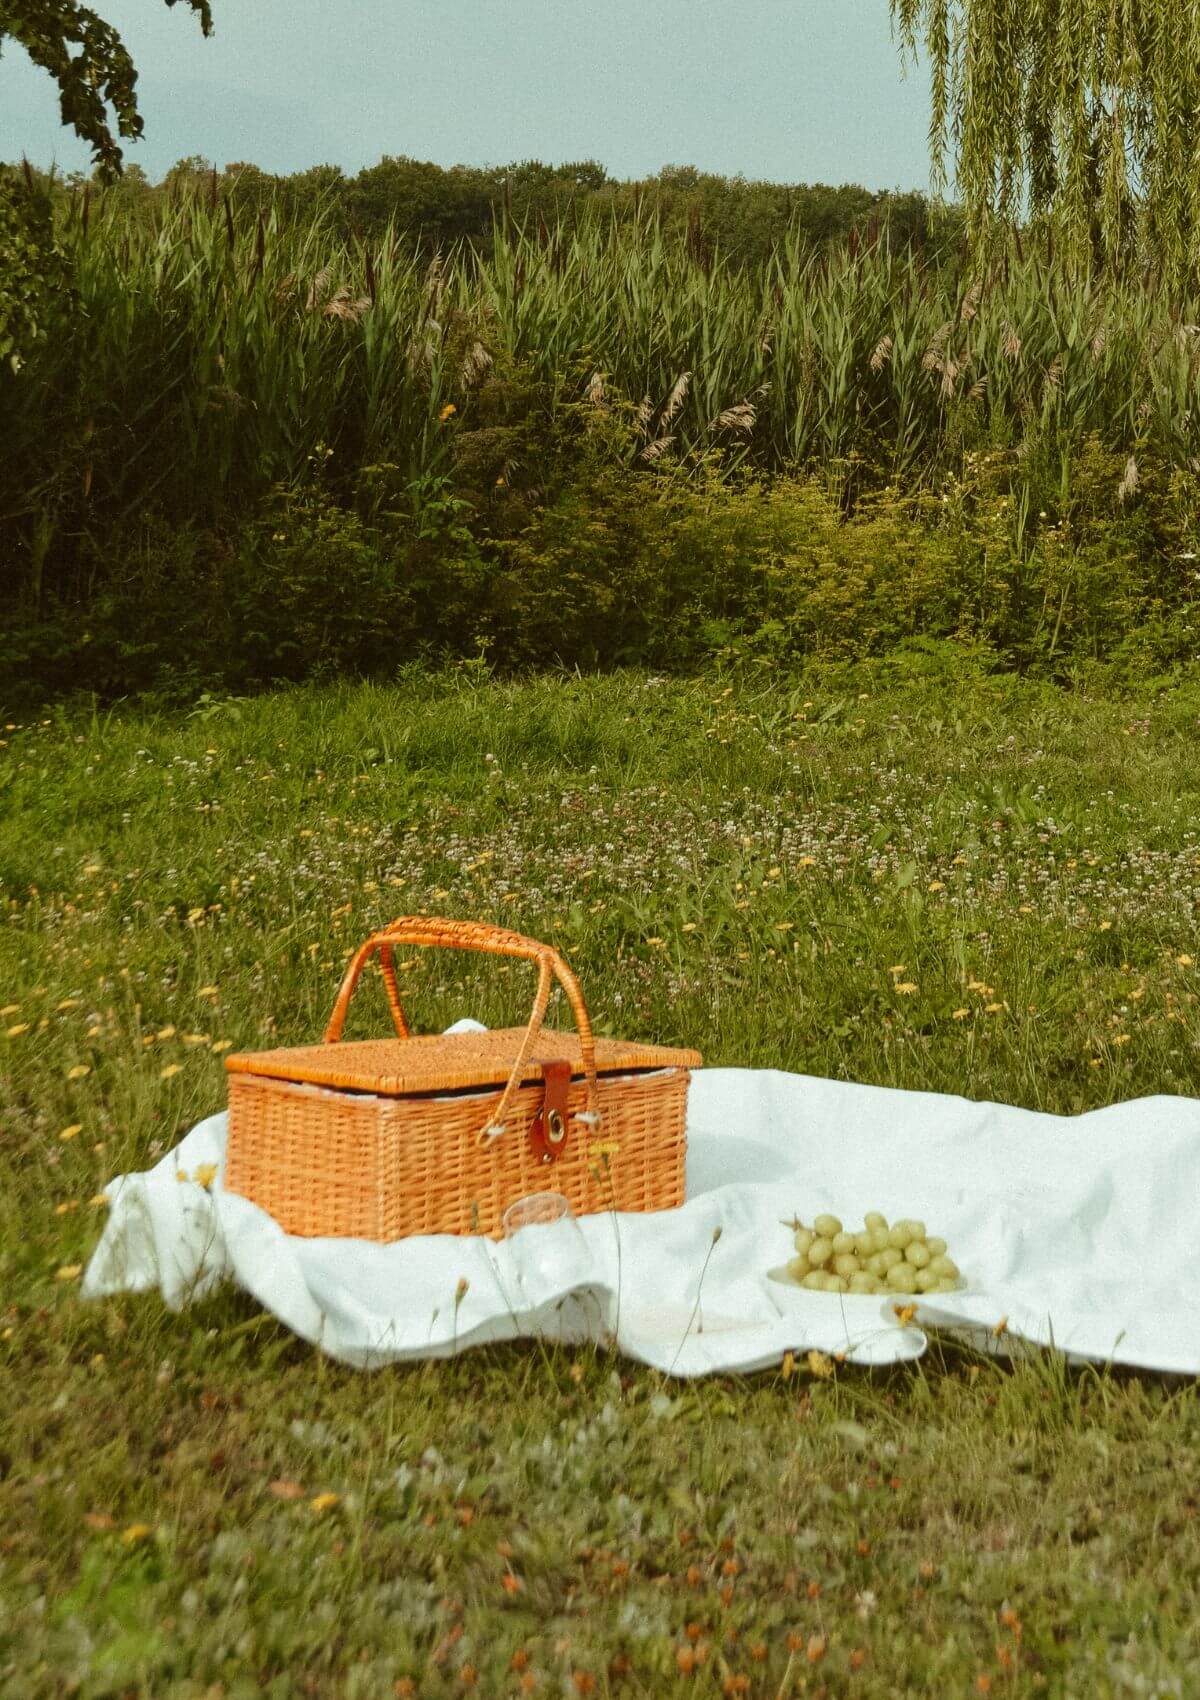 Picnic basket on the grass 